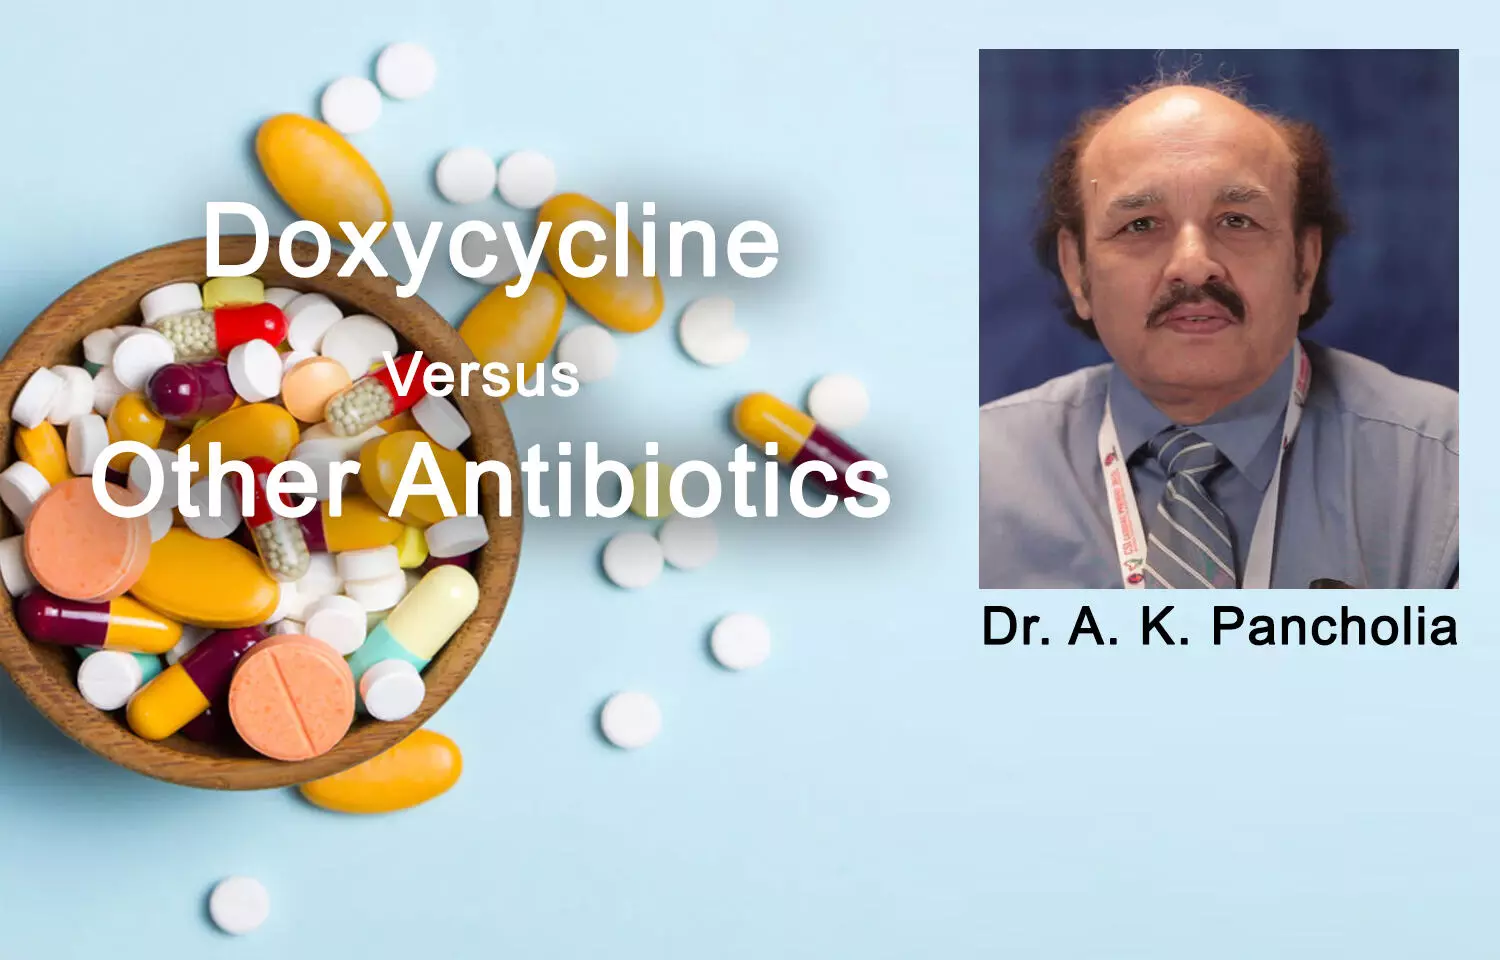 Doxycycline - Comparative Review with Other Commonly Used Antibiotics In Clinical Practice in India